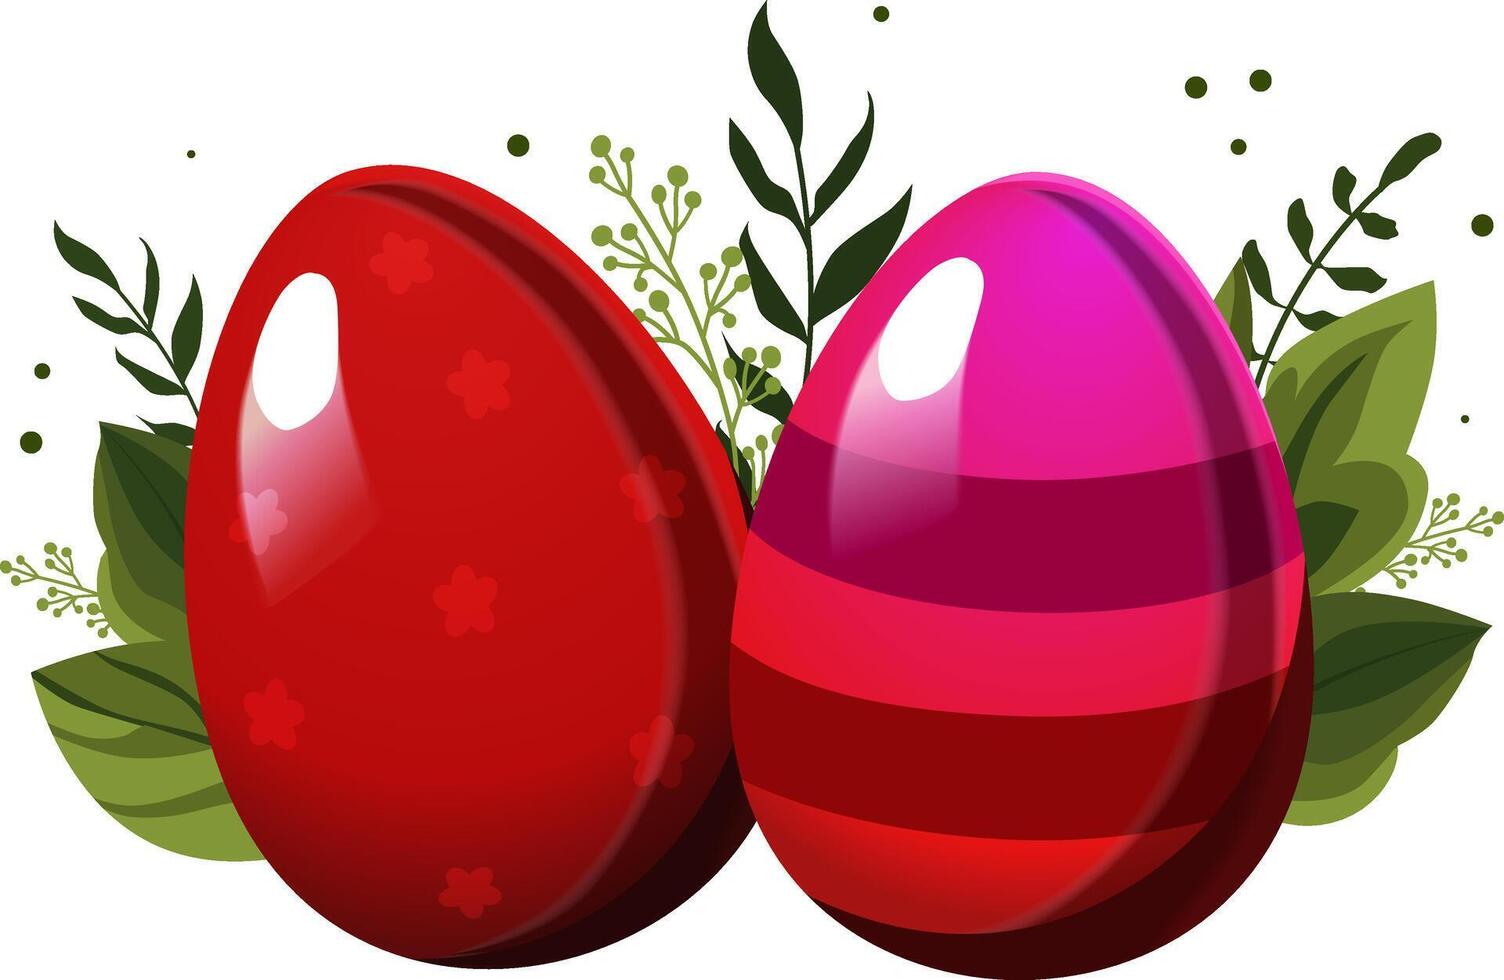 Red pink Easter striped egg and egg with polka dots with green leaves and branches on background. Illustration in flat style. Vector clipart for design of card, banner, flyer, sale, poster, icons